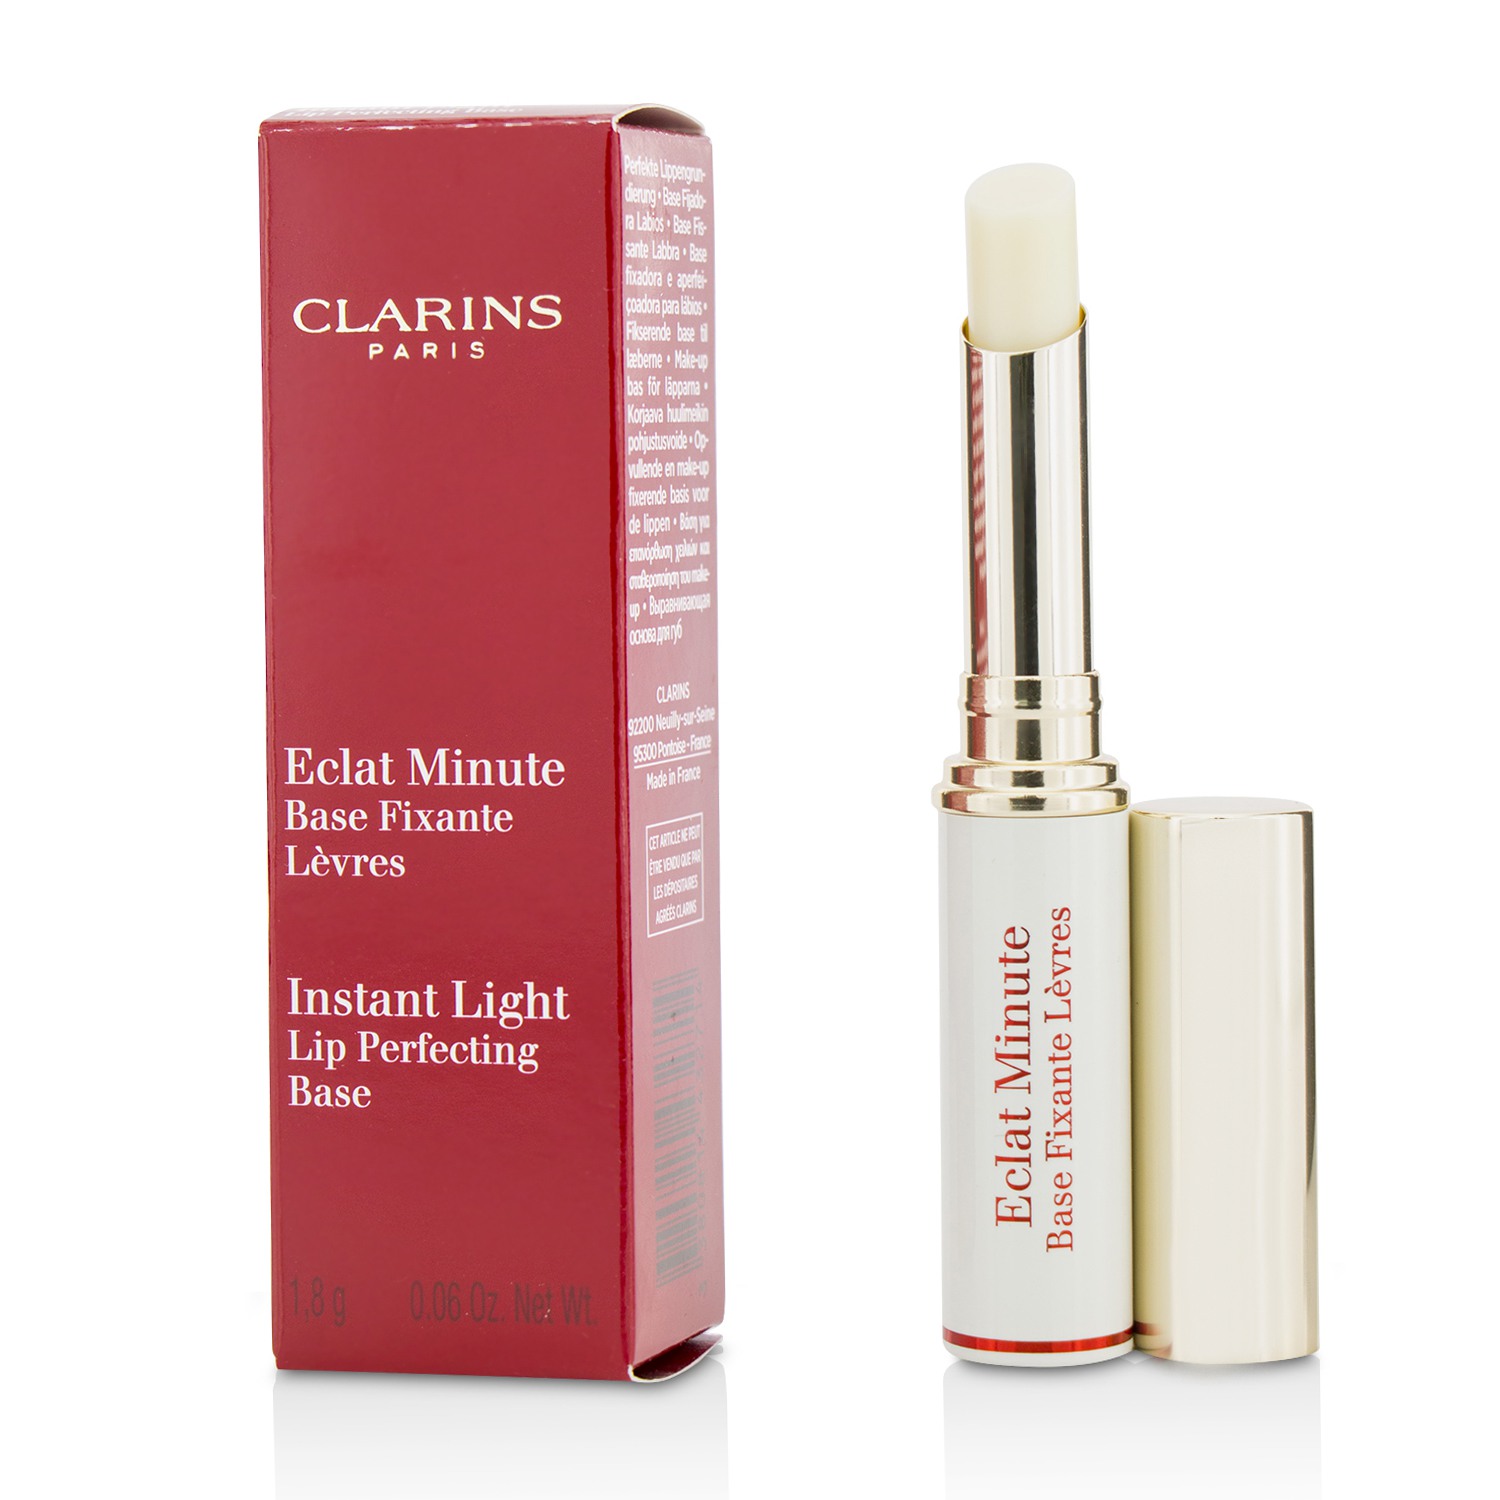 Eclat Minute Instant Light Lip Perfecting Base Clarins Image